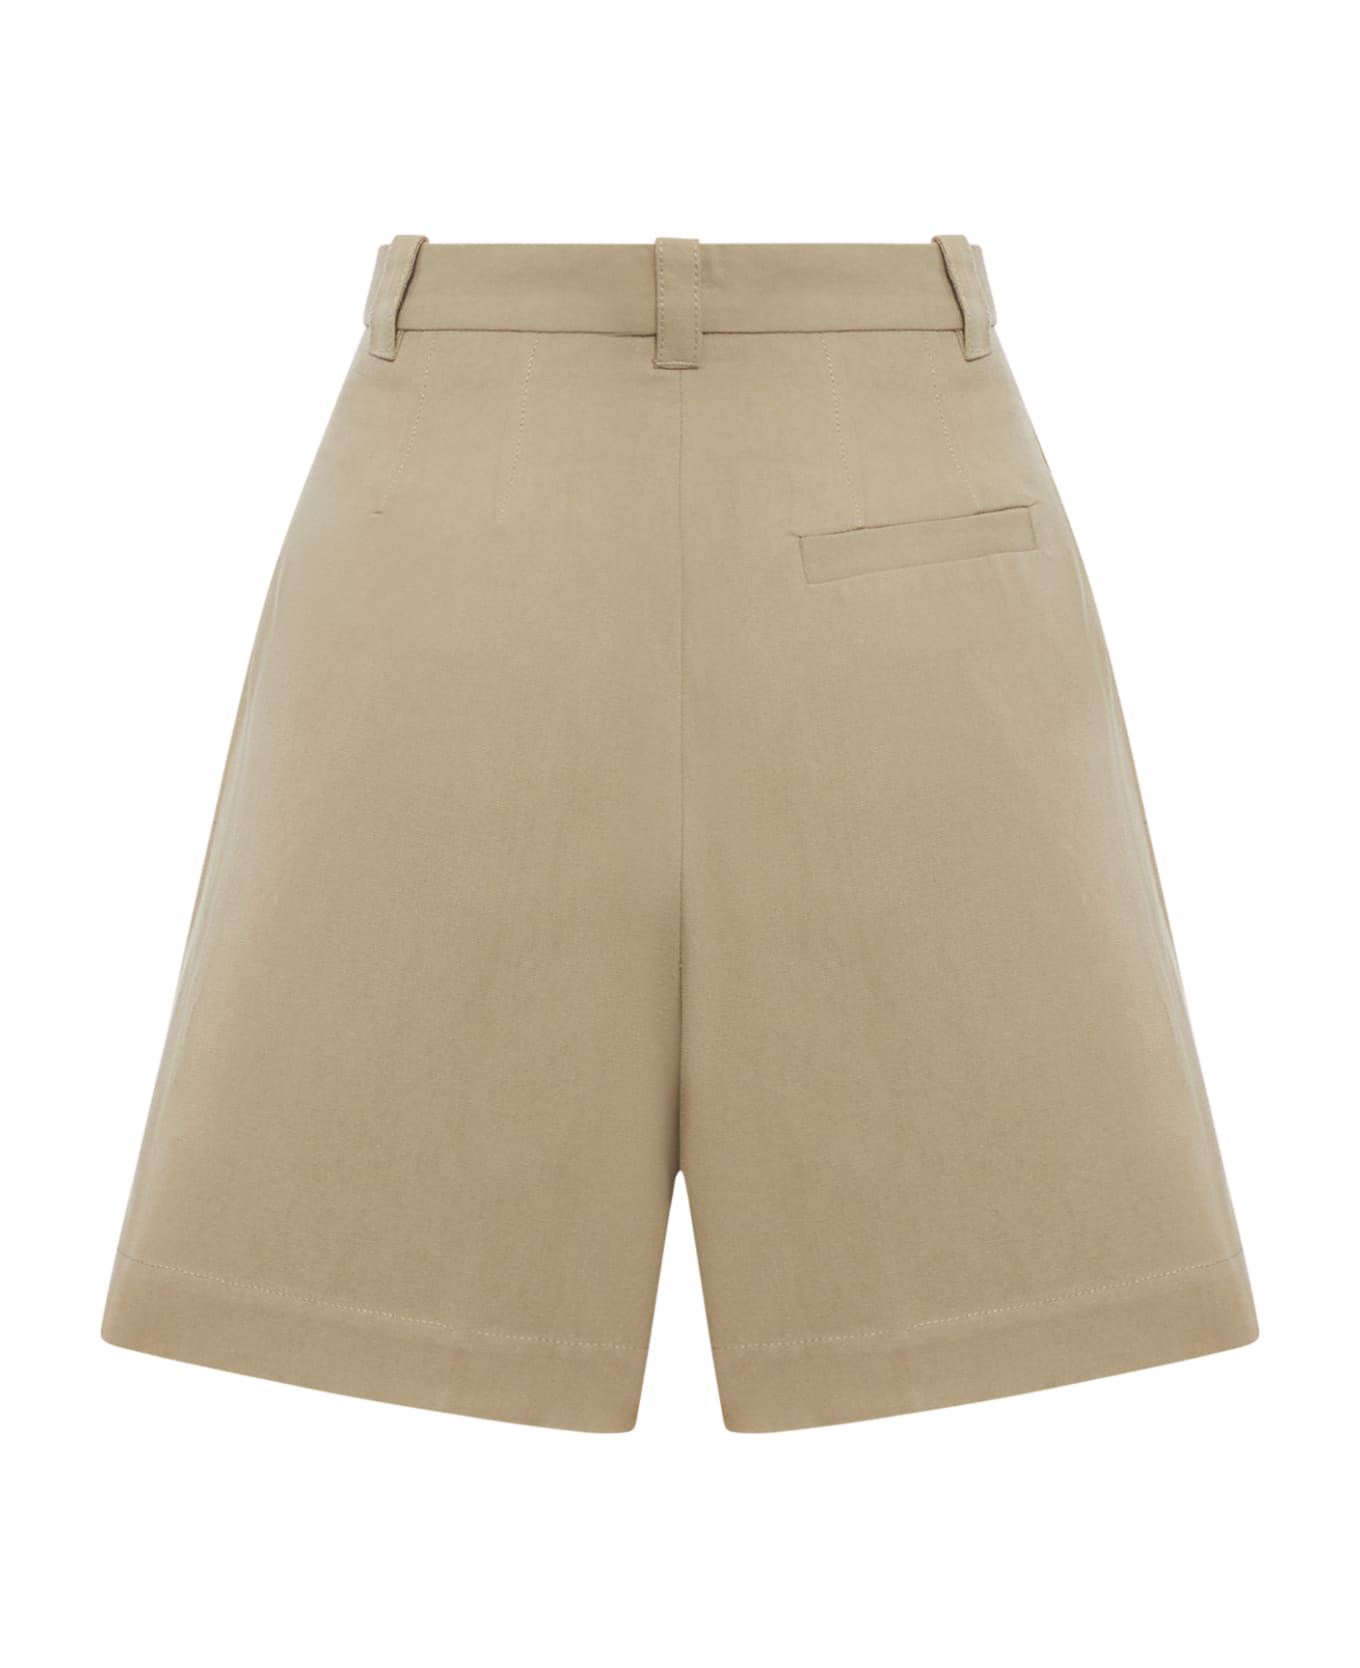 A.P.C. Cotton And Linen Shorts - Baa Beige ショートパンツ